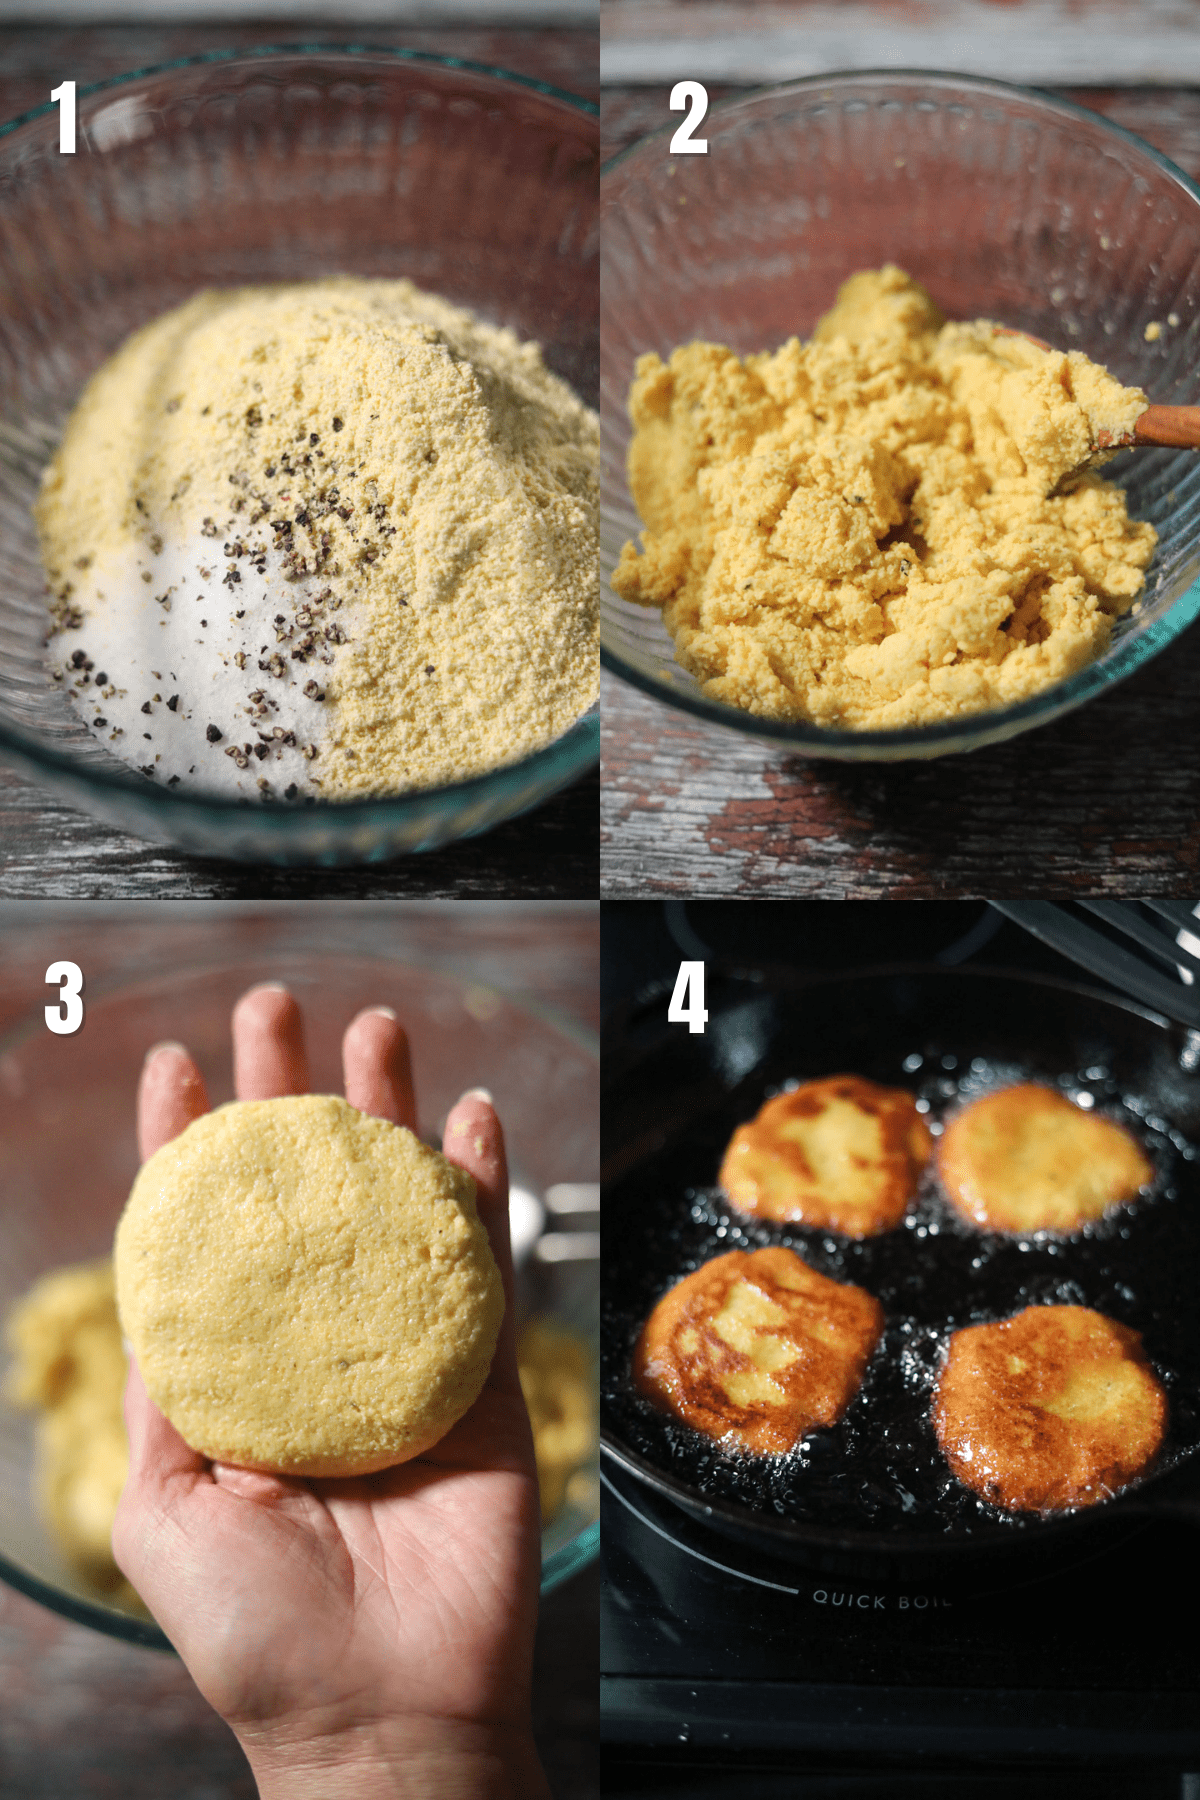 Step-by-step images for making hot water cornbread.